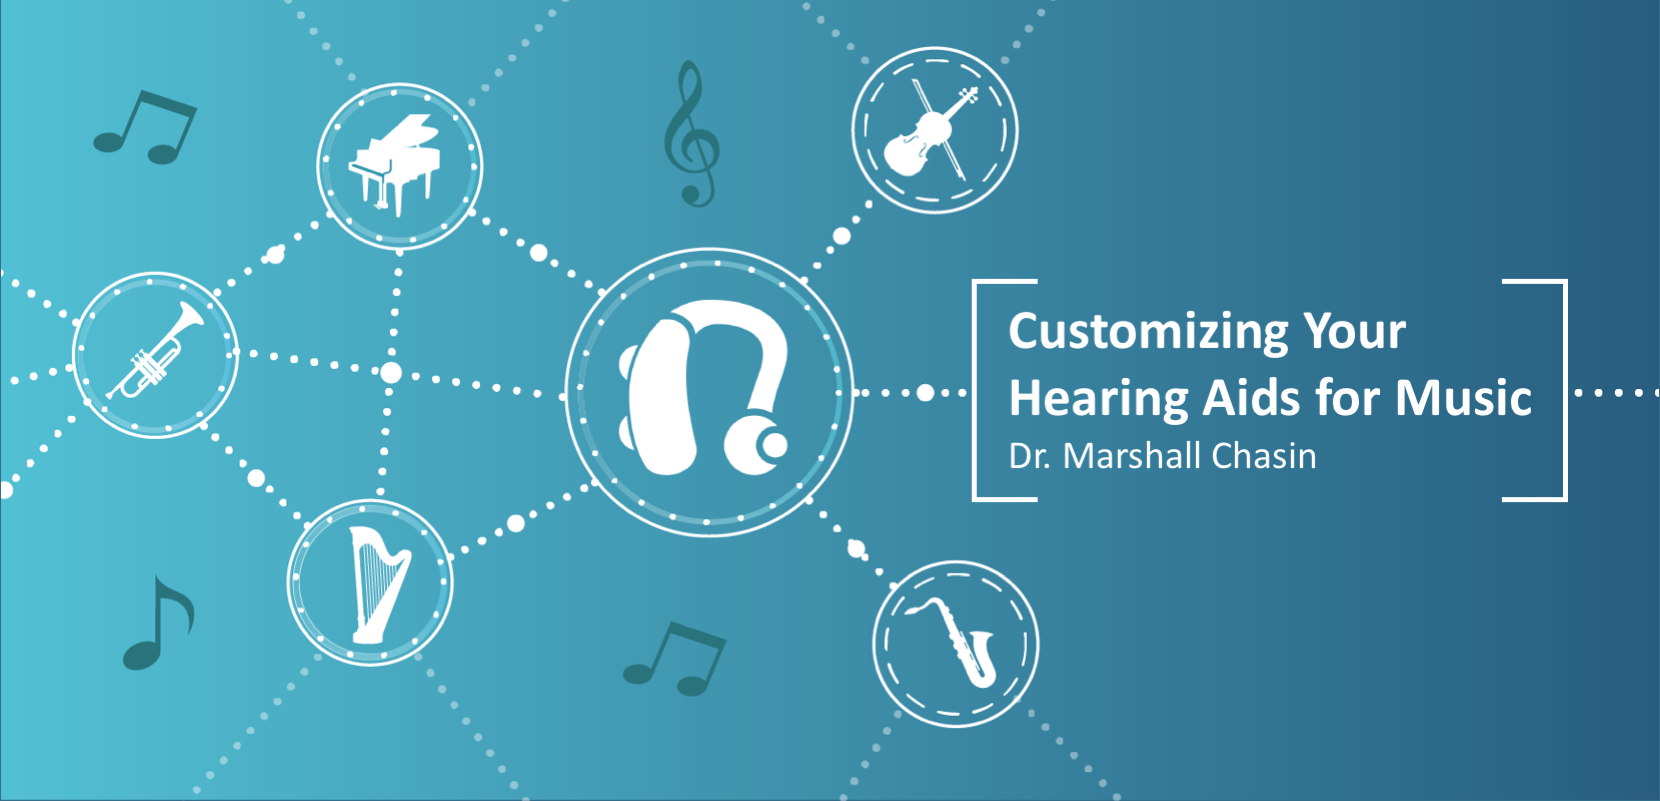 Dr. Chasin’s Checklist for Optimizing Your Hearing Aids for Music